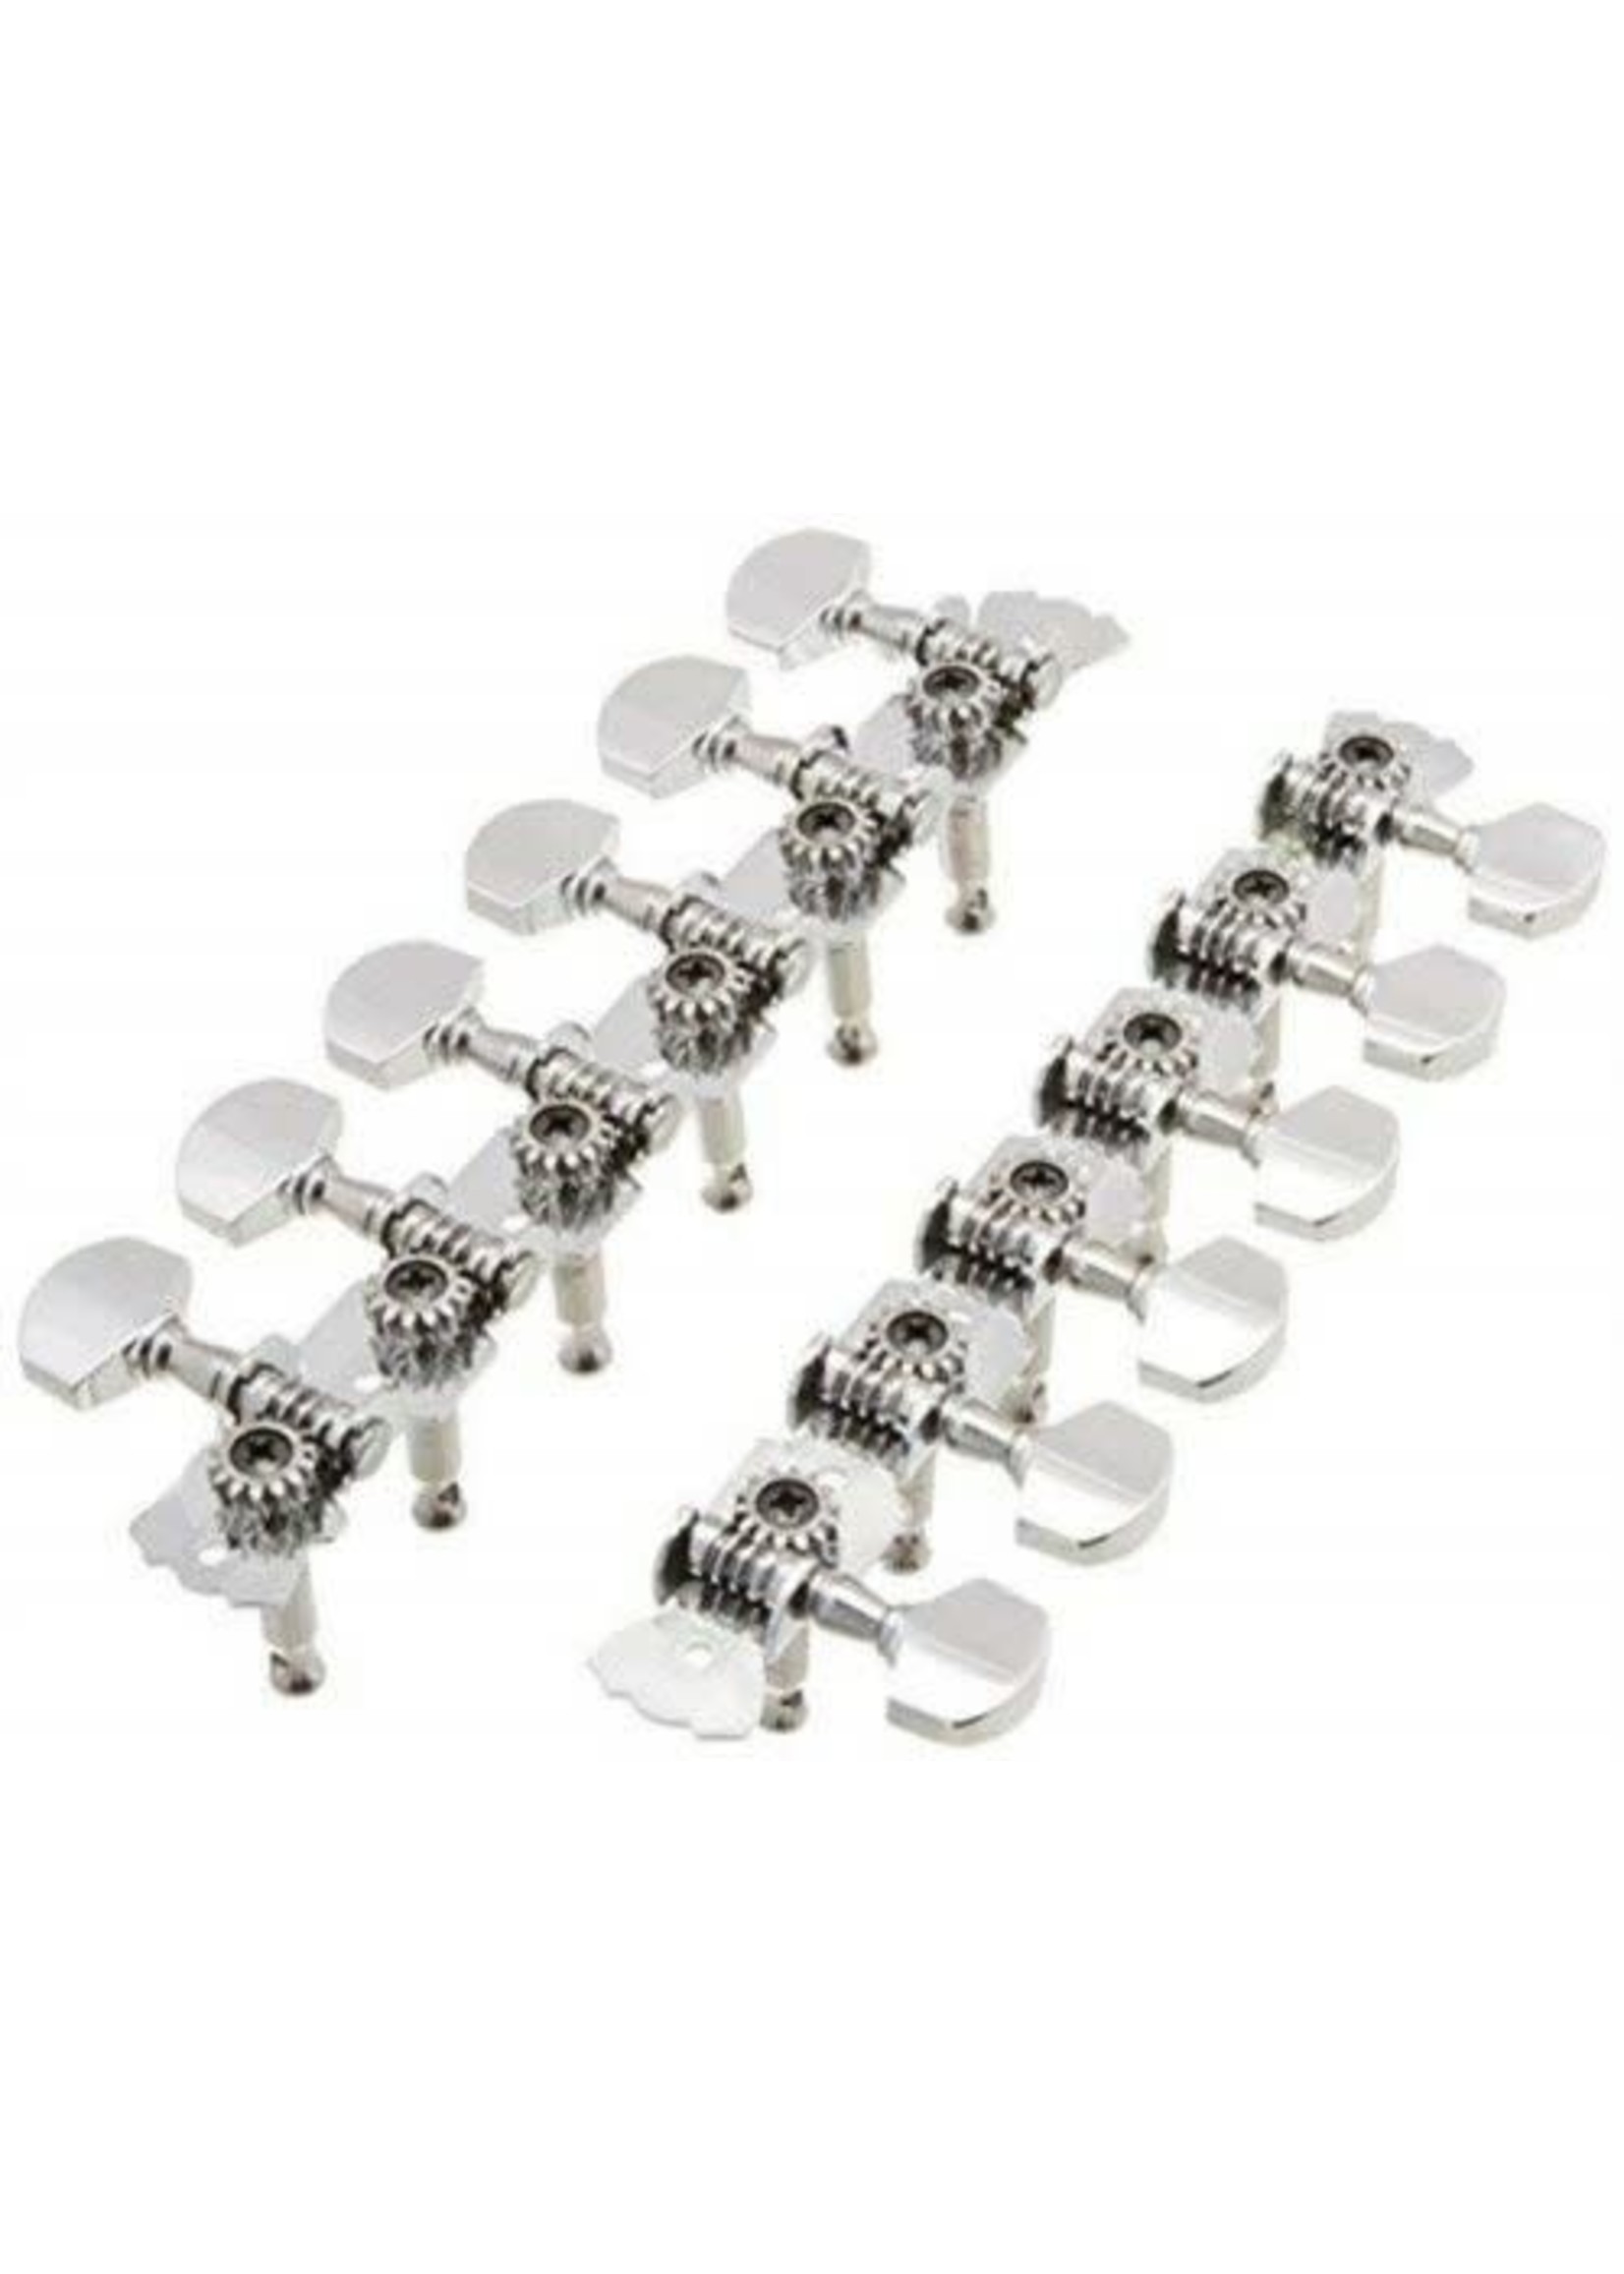 PING PING 12 STRING TUNERS 2 PC